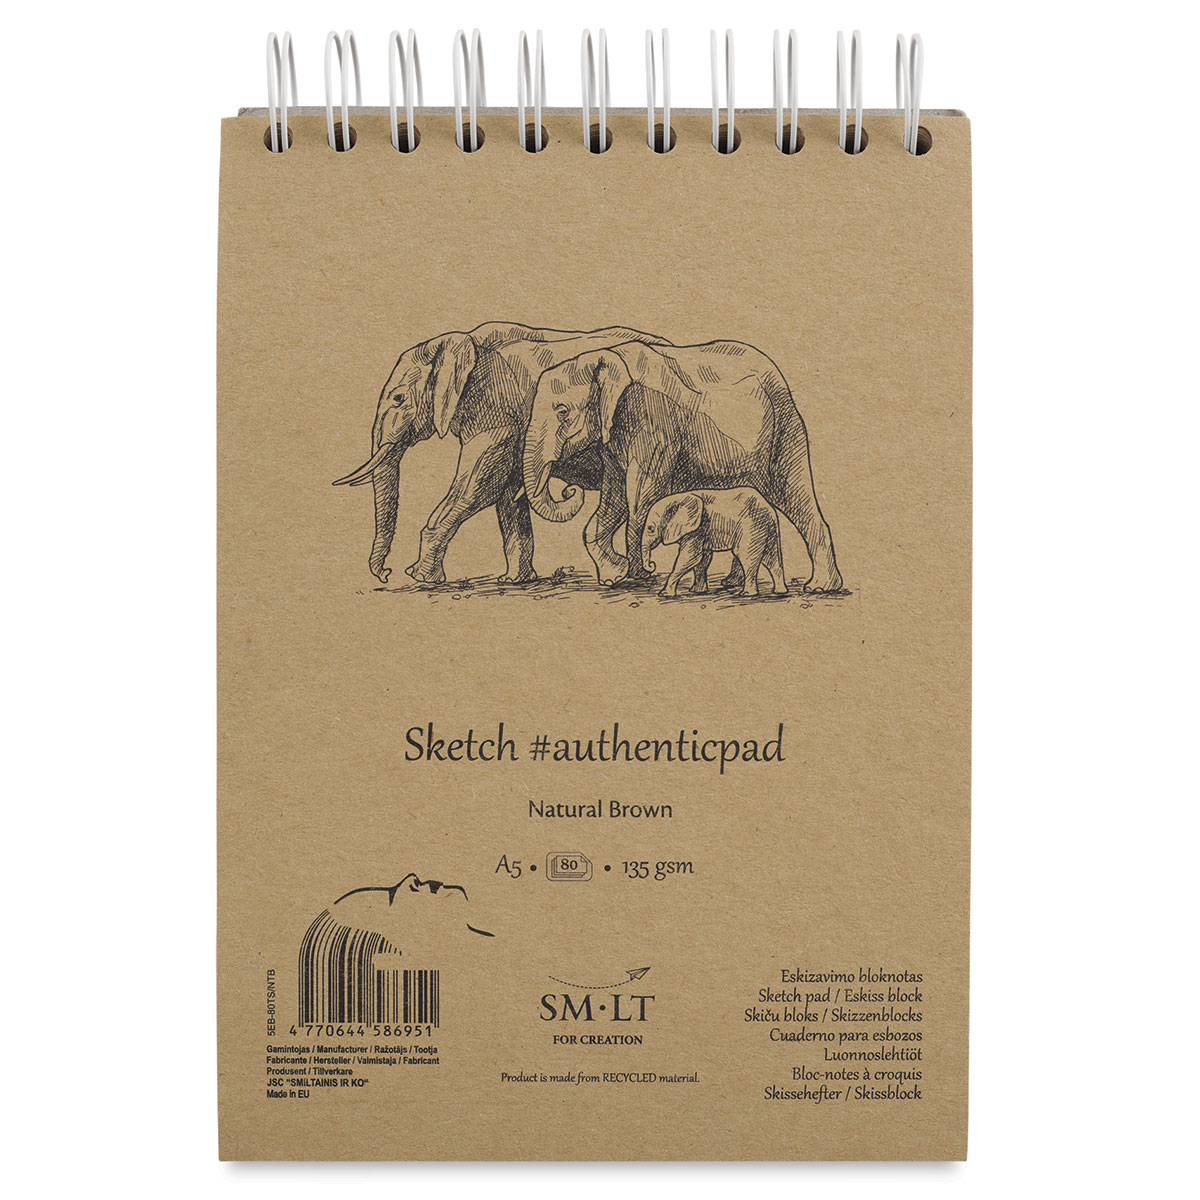  U.S. Art Supply 5.5 x 8.5 Top Spiral Bound Sketch Book Pad,  Pack of 2, 100 Sheets Each, 60lb (100gsm) - Artist Sketching Drawing Pad,  Acid-Free - Graphite Colored Pencils, Charcoal 